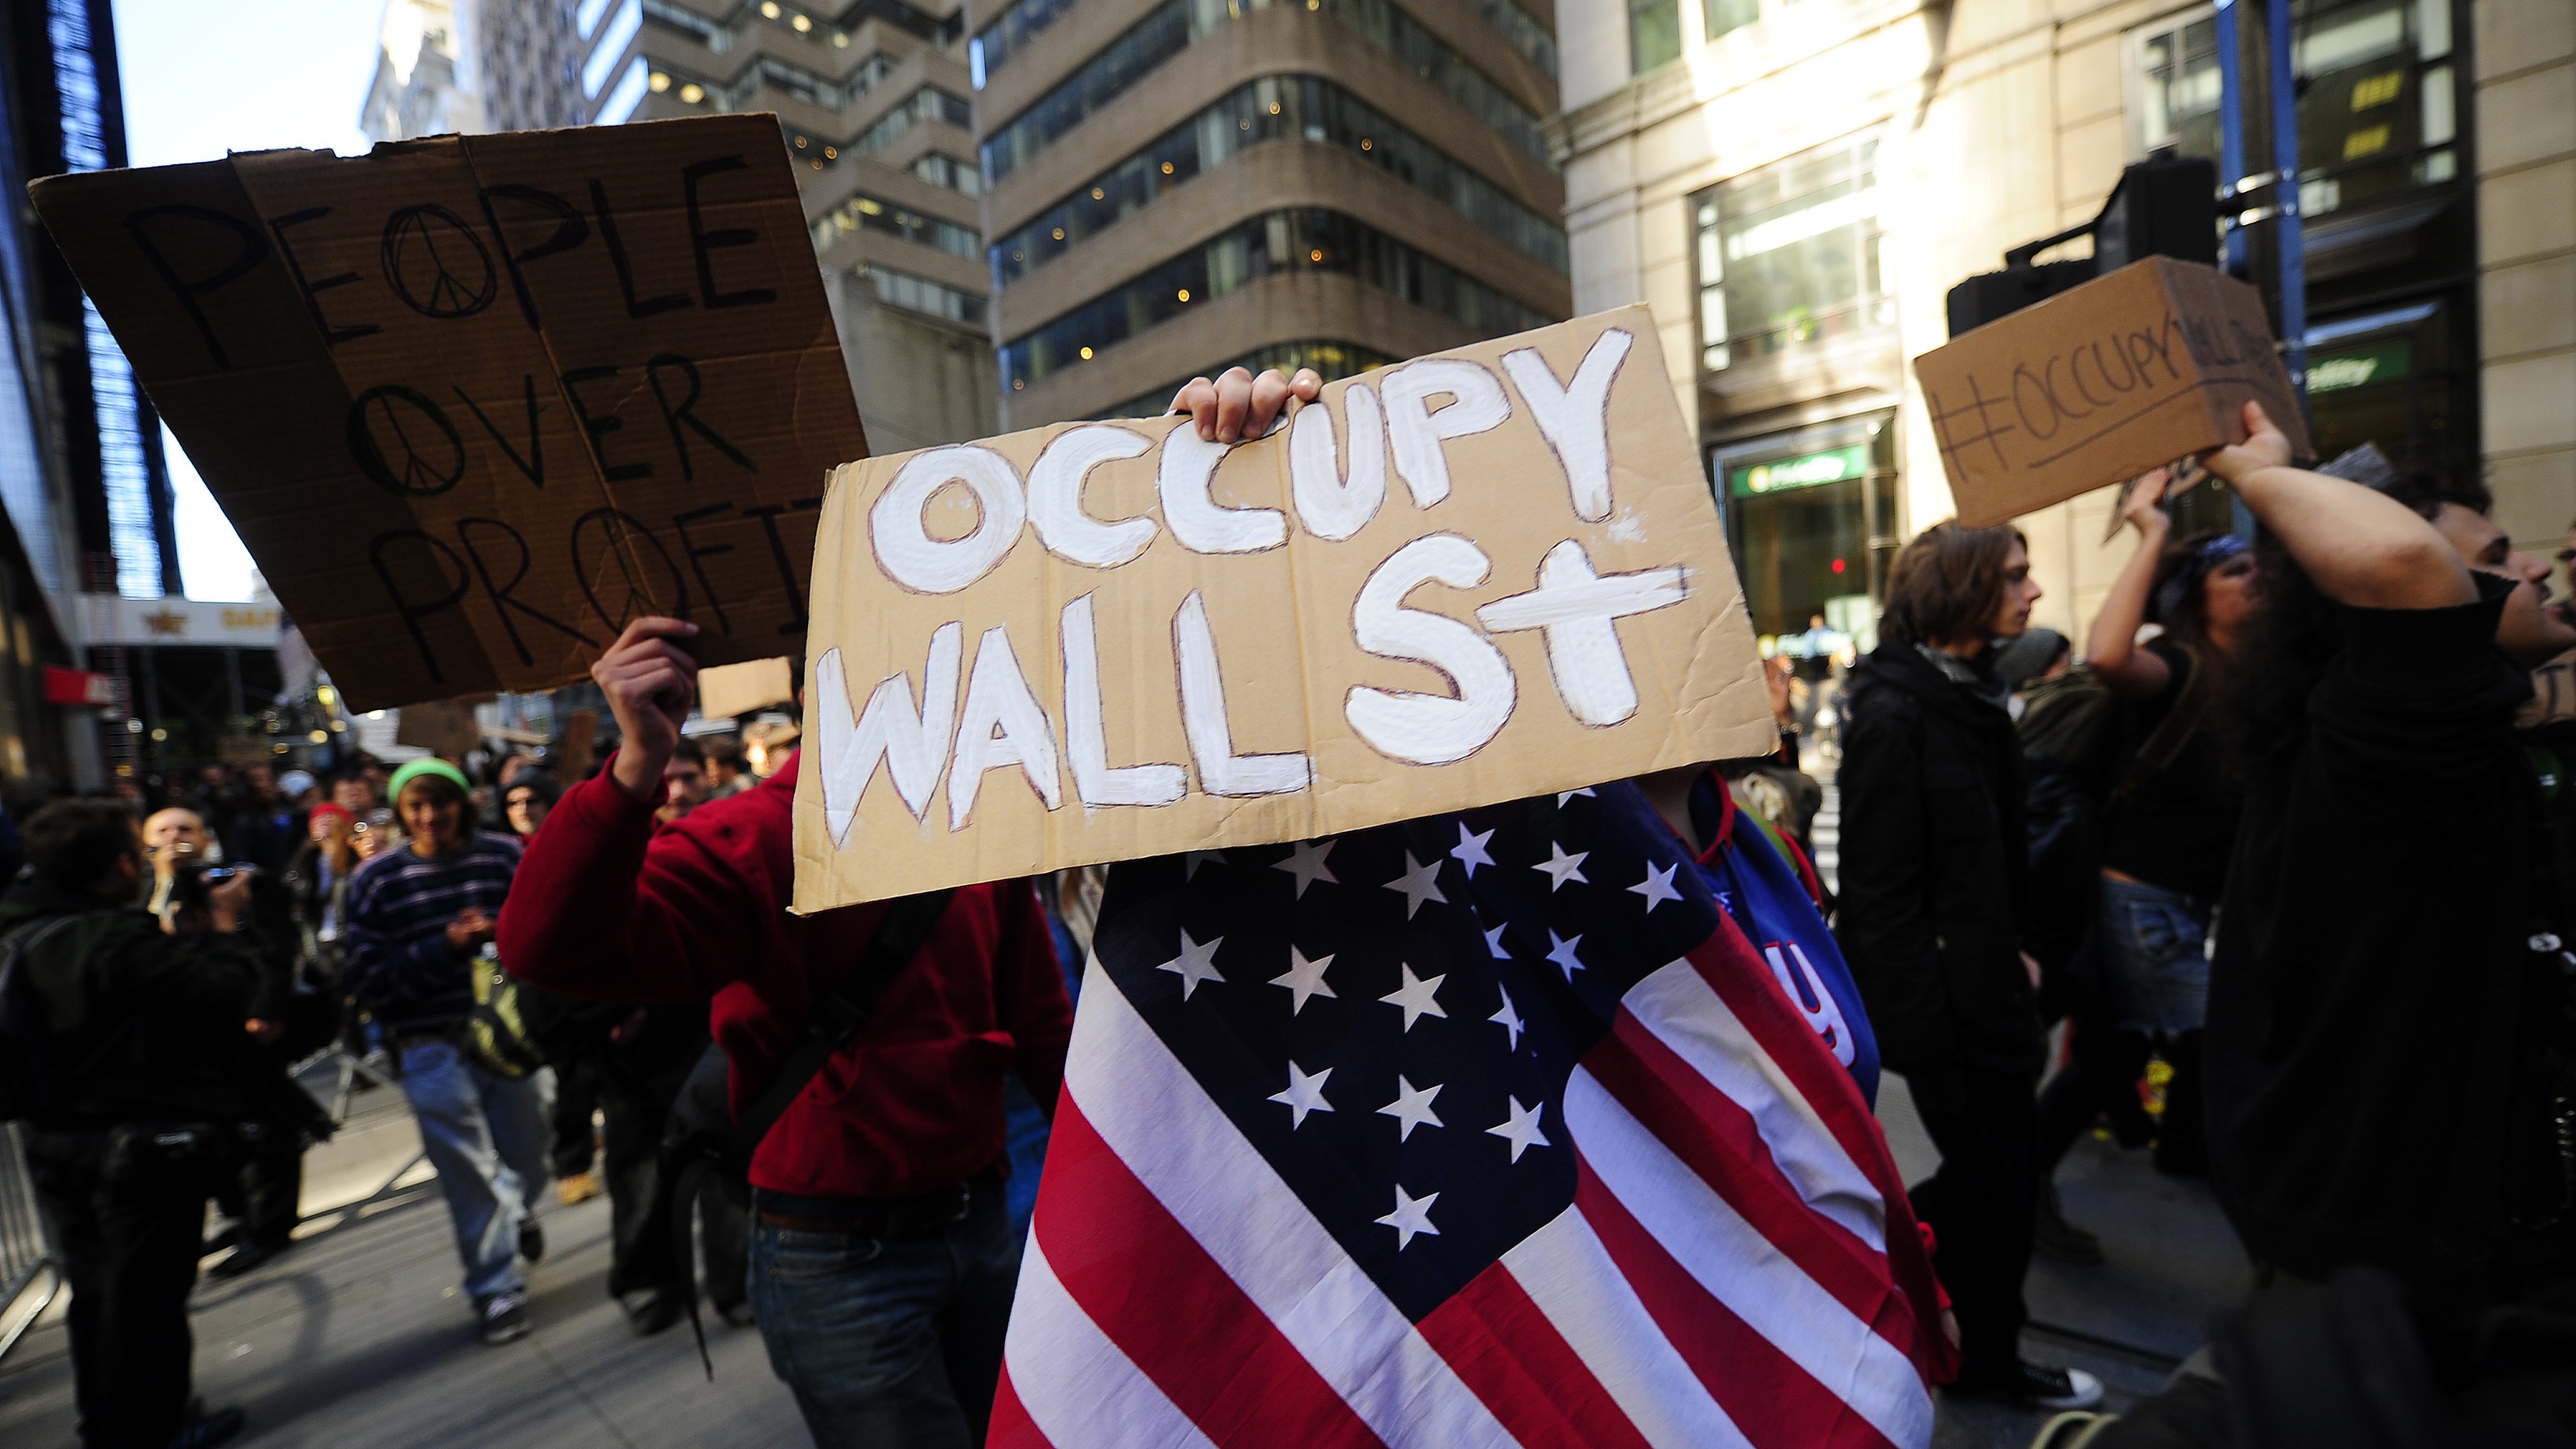 10 years later, was the Occupy Wall Street movement effective? - Marketplace